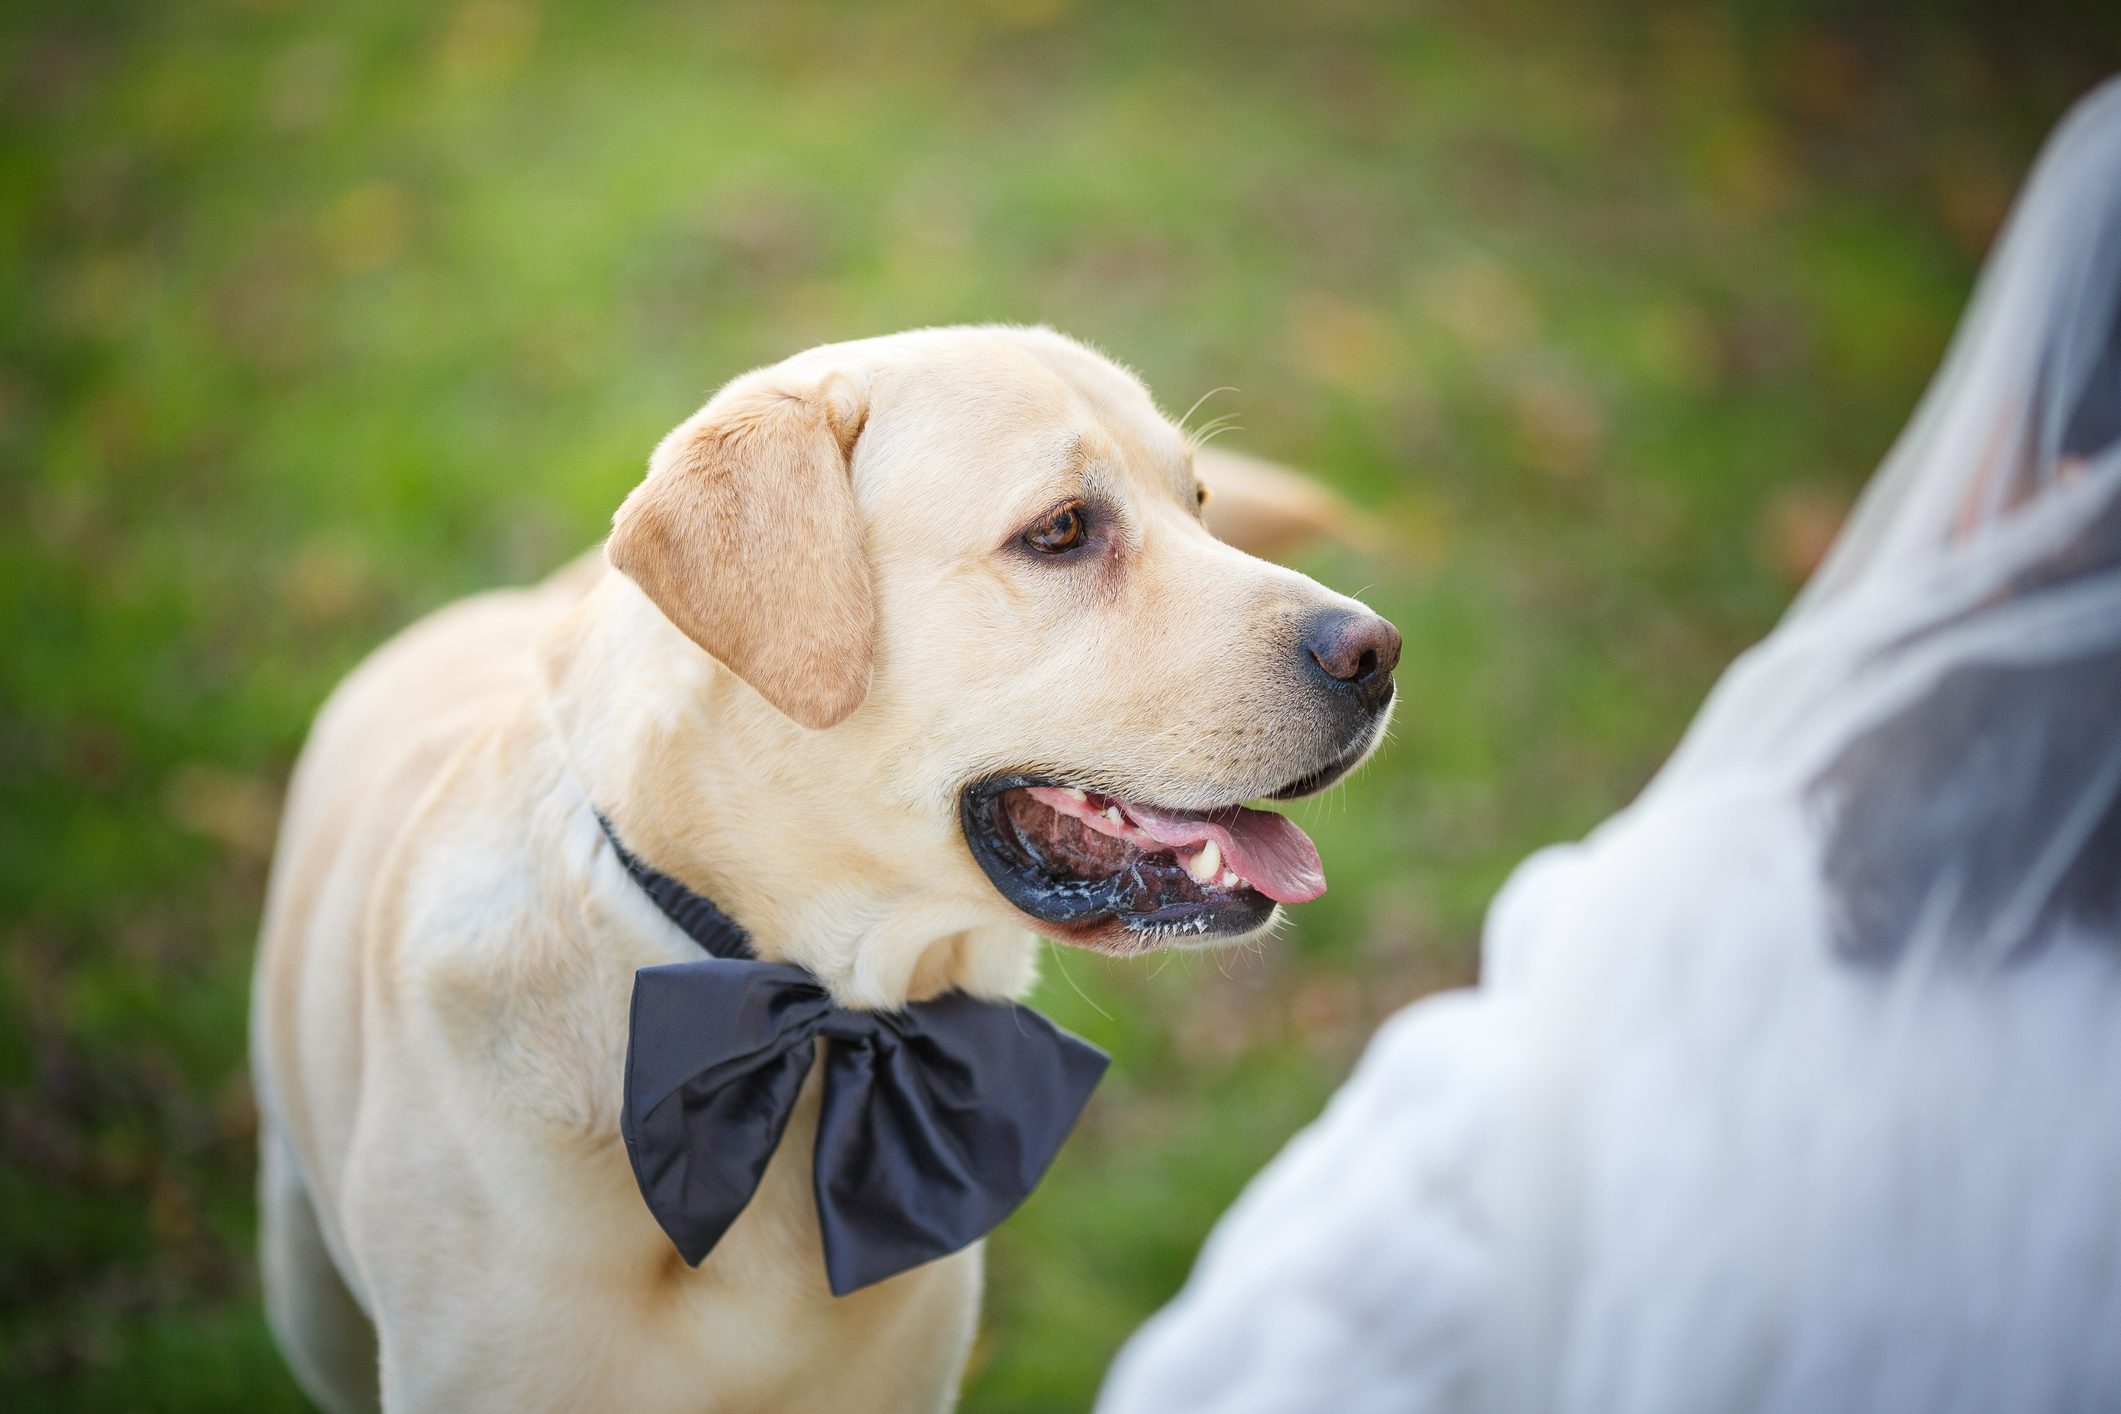 A Labrador dog with a bow tie looks at a person, in a wedding setting